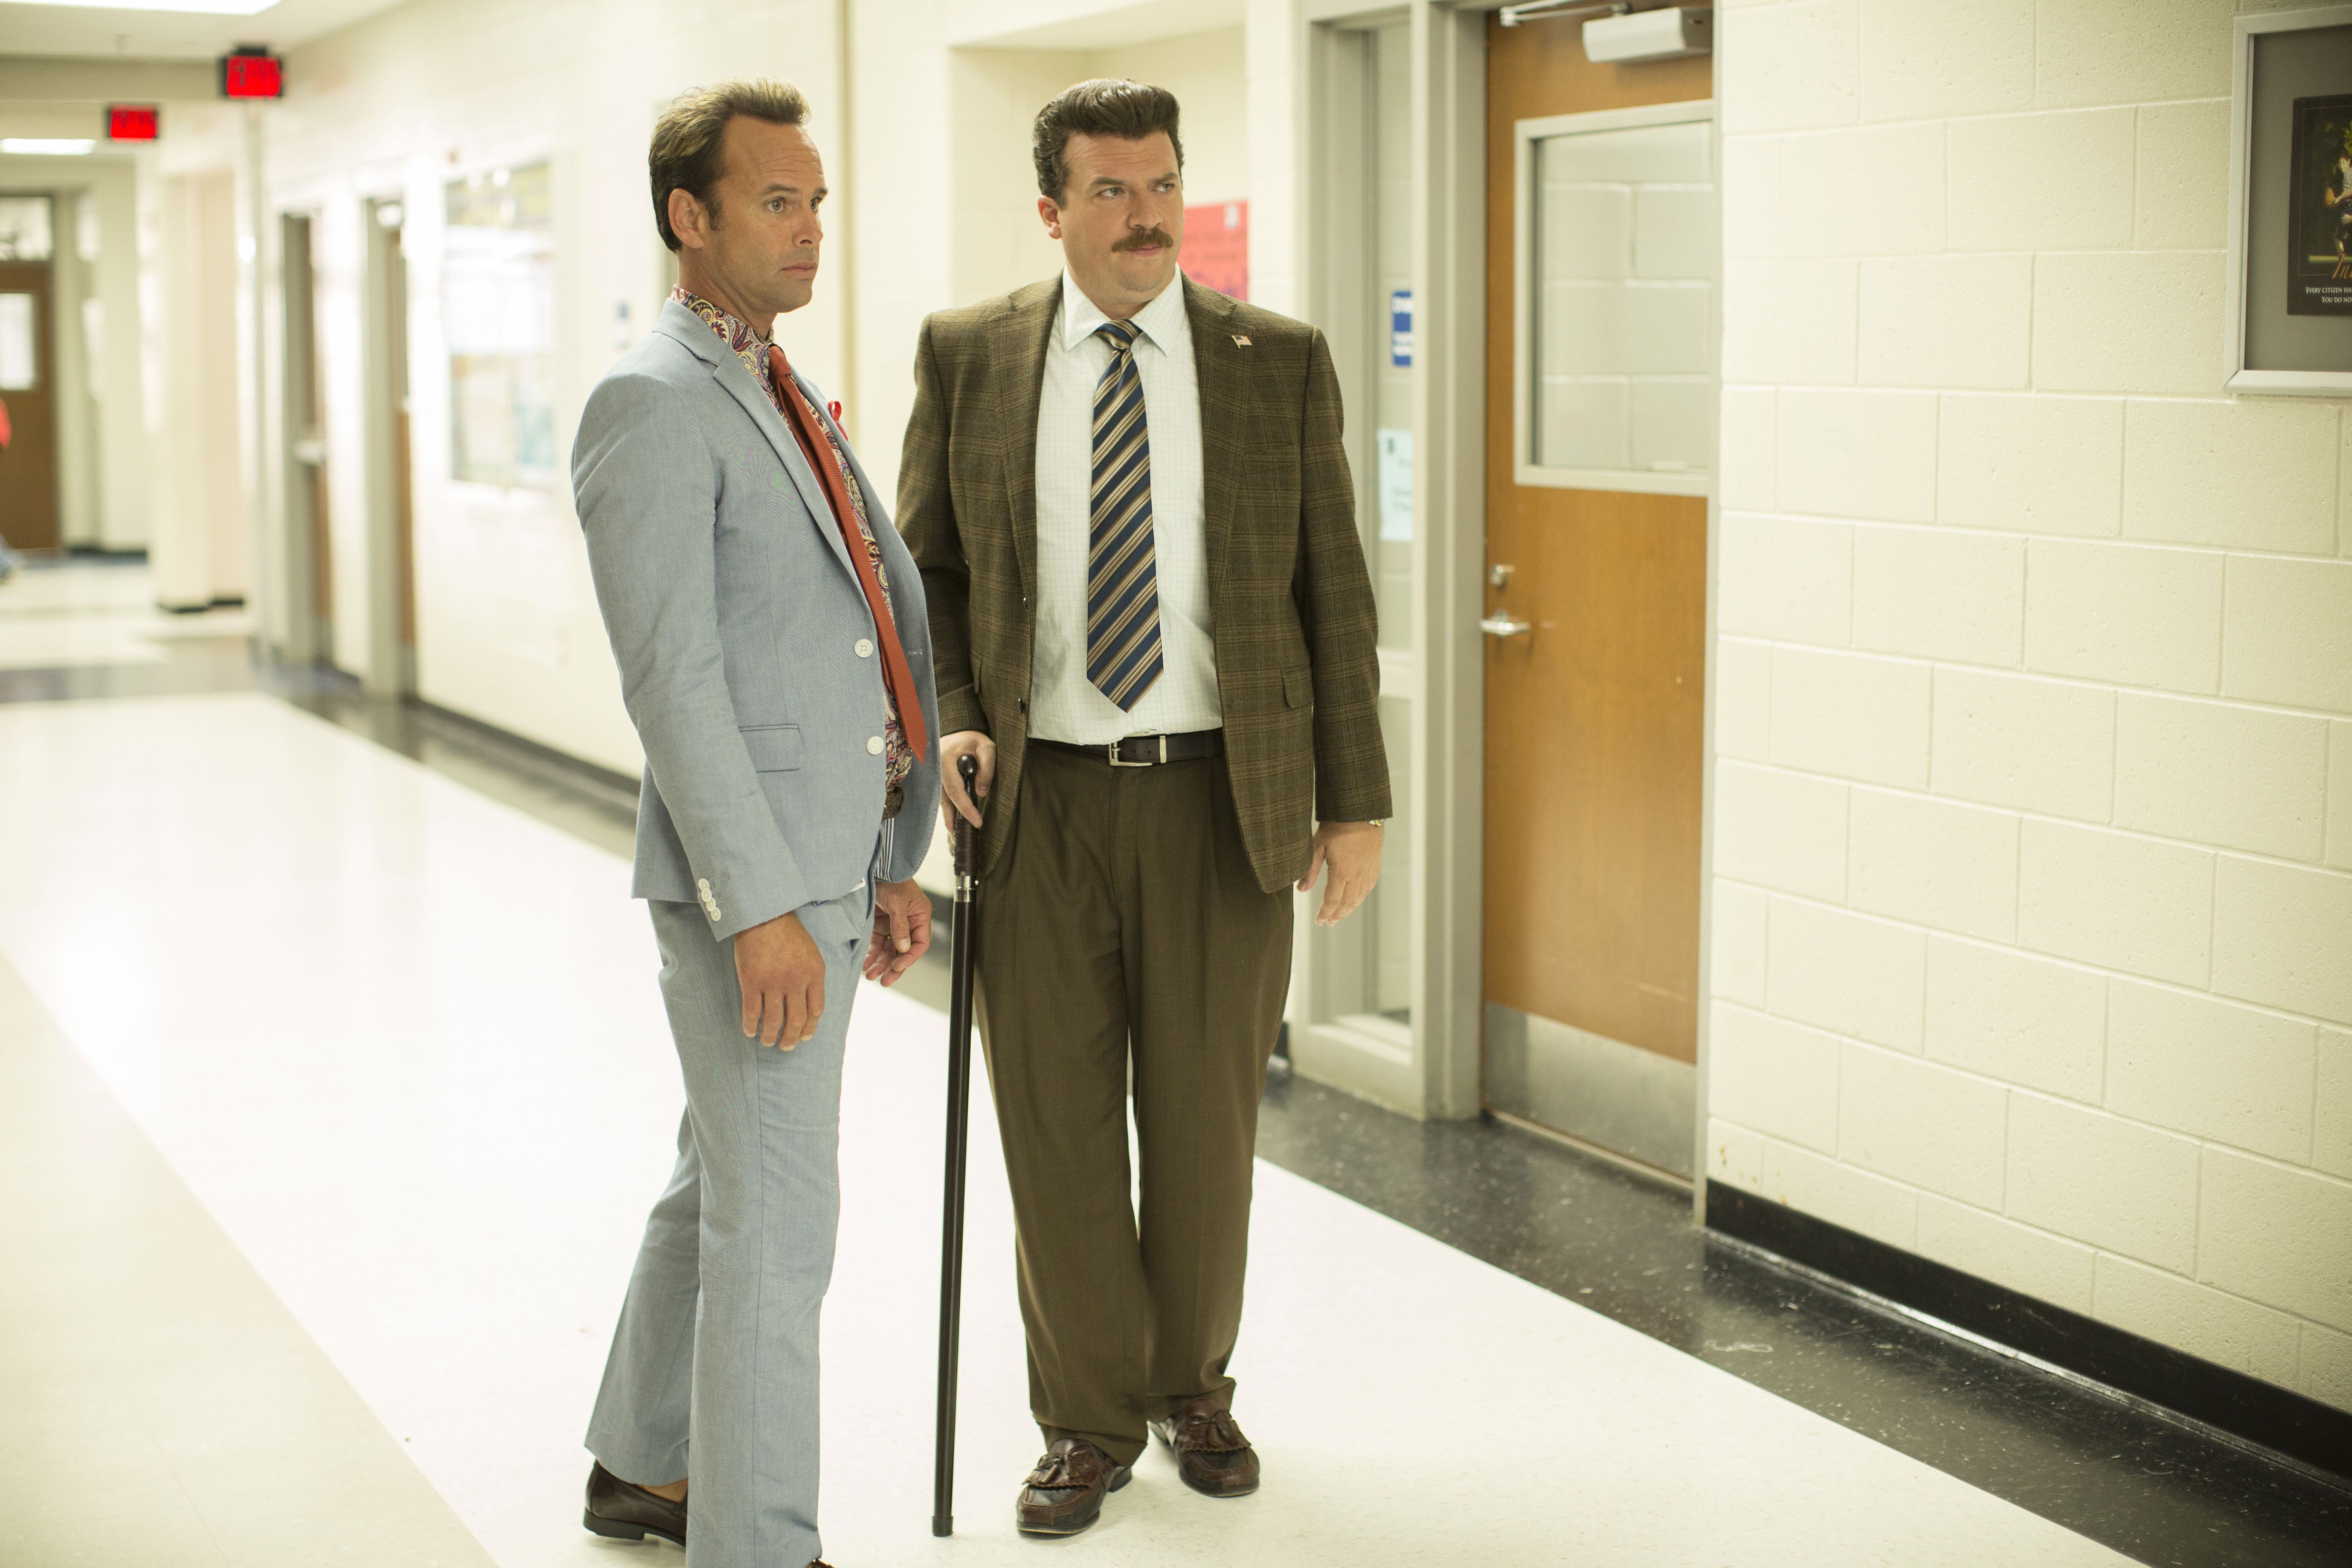 40e961b902e1c4b97287cb0d46e8ad9243b7ae994d4fca2f1957e8d8b778e5f0 HBOs Vice Principals Returns and the Stakes are Life and Death